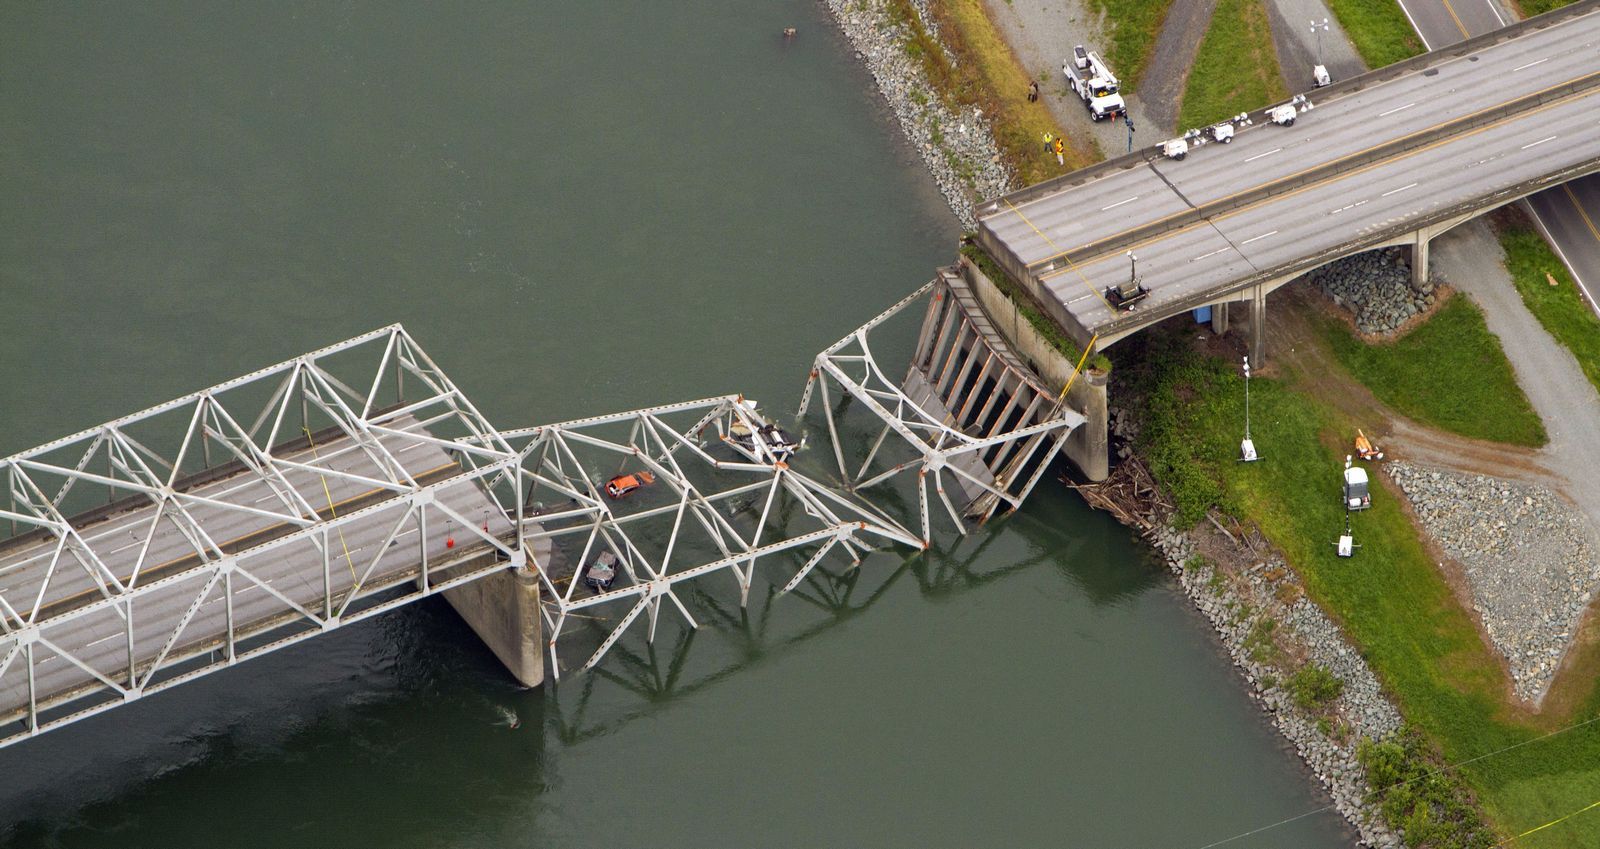 Associated PressA collapsed section of the I-5 bridge over the Skagit River is seen in an aerial view Friday. Part of the bridge collapsed Thursday evening, sending cars and people into the water when a an oversized truck hit the span.